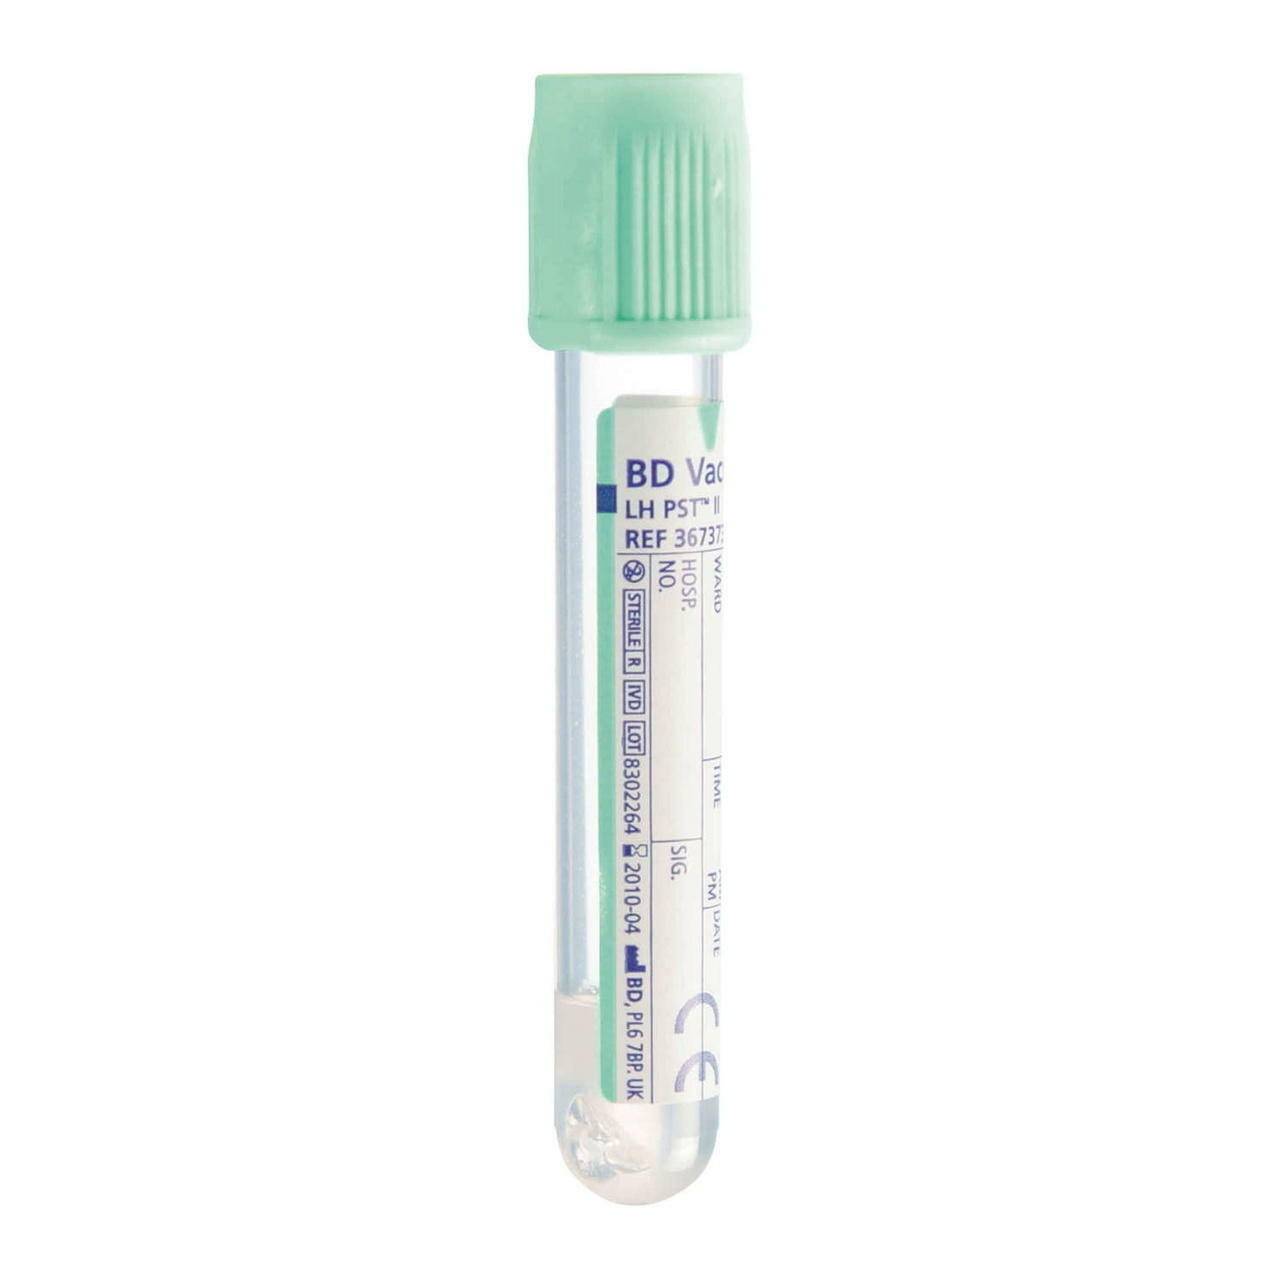 BD Vacutainer Tube Pst Ii Plasma 3ml Light Green Blood Collection Tubes